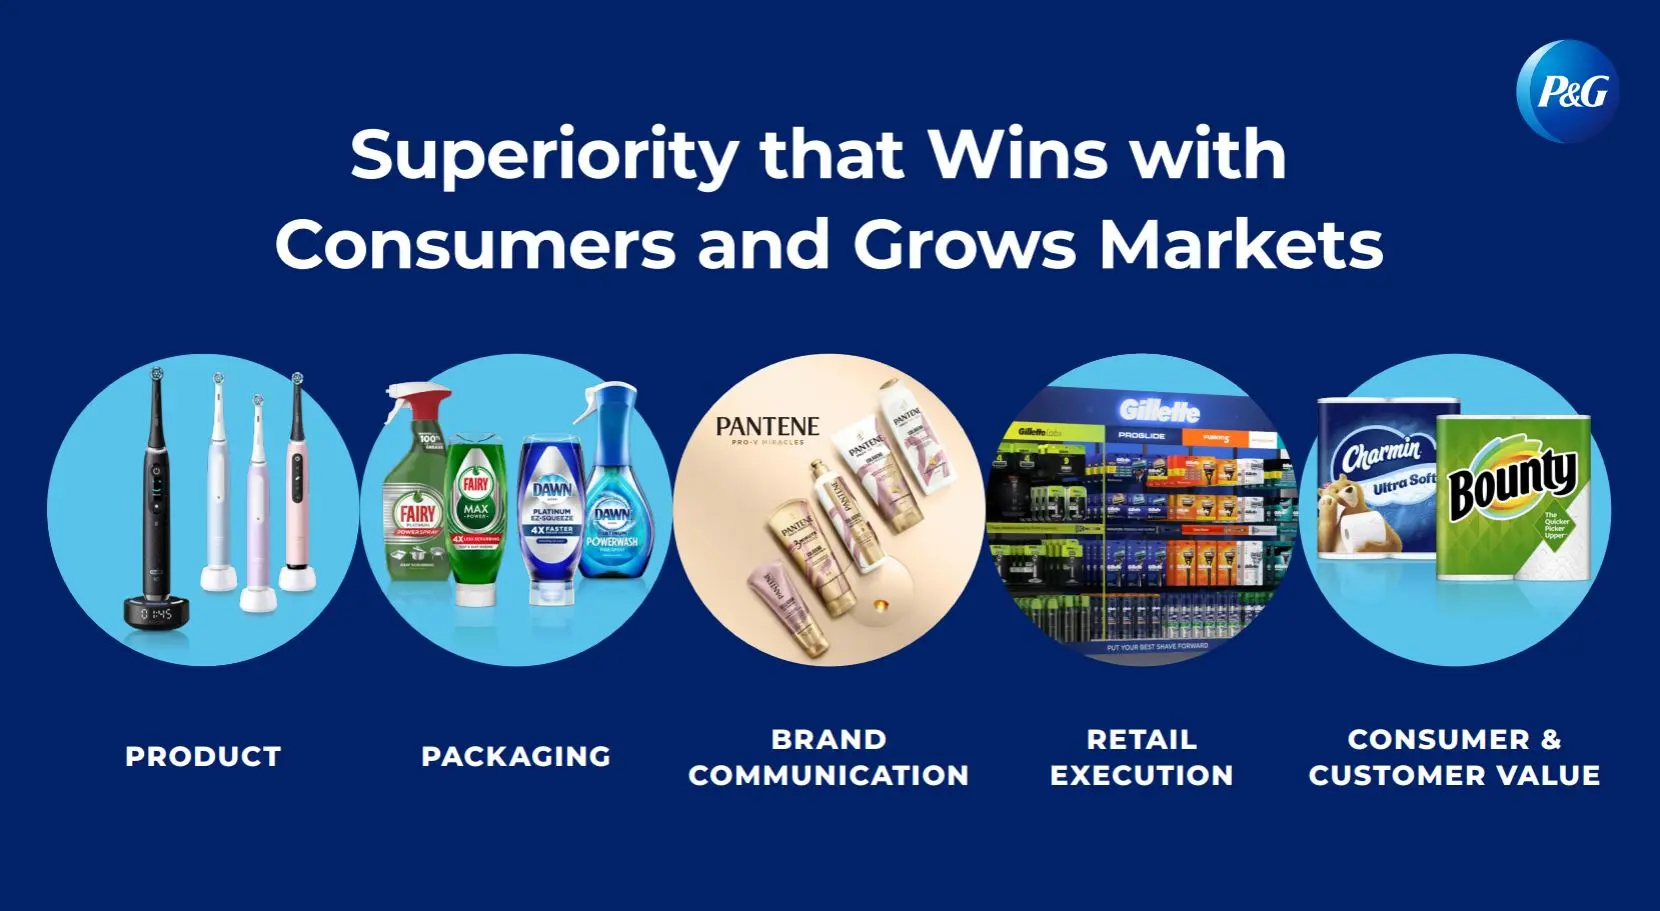 Superiority that Wins with Consumers and Grows Markets. Five images: Oral-B, Dawn and Fairy, Pantene, Gillette, Charmin and Bounty with the captions product, packaging, brand communication, retail execution and consumer & customer value.